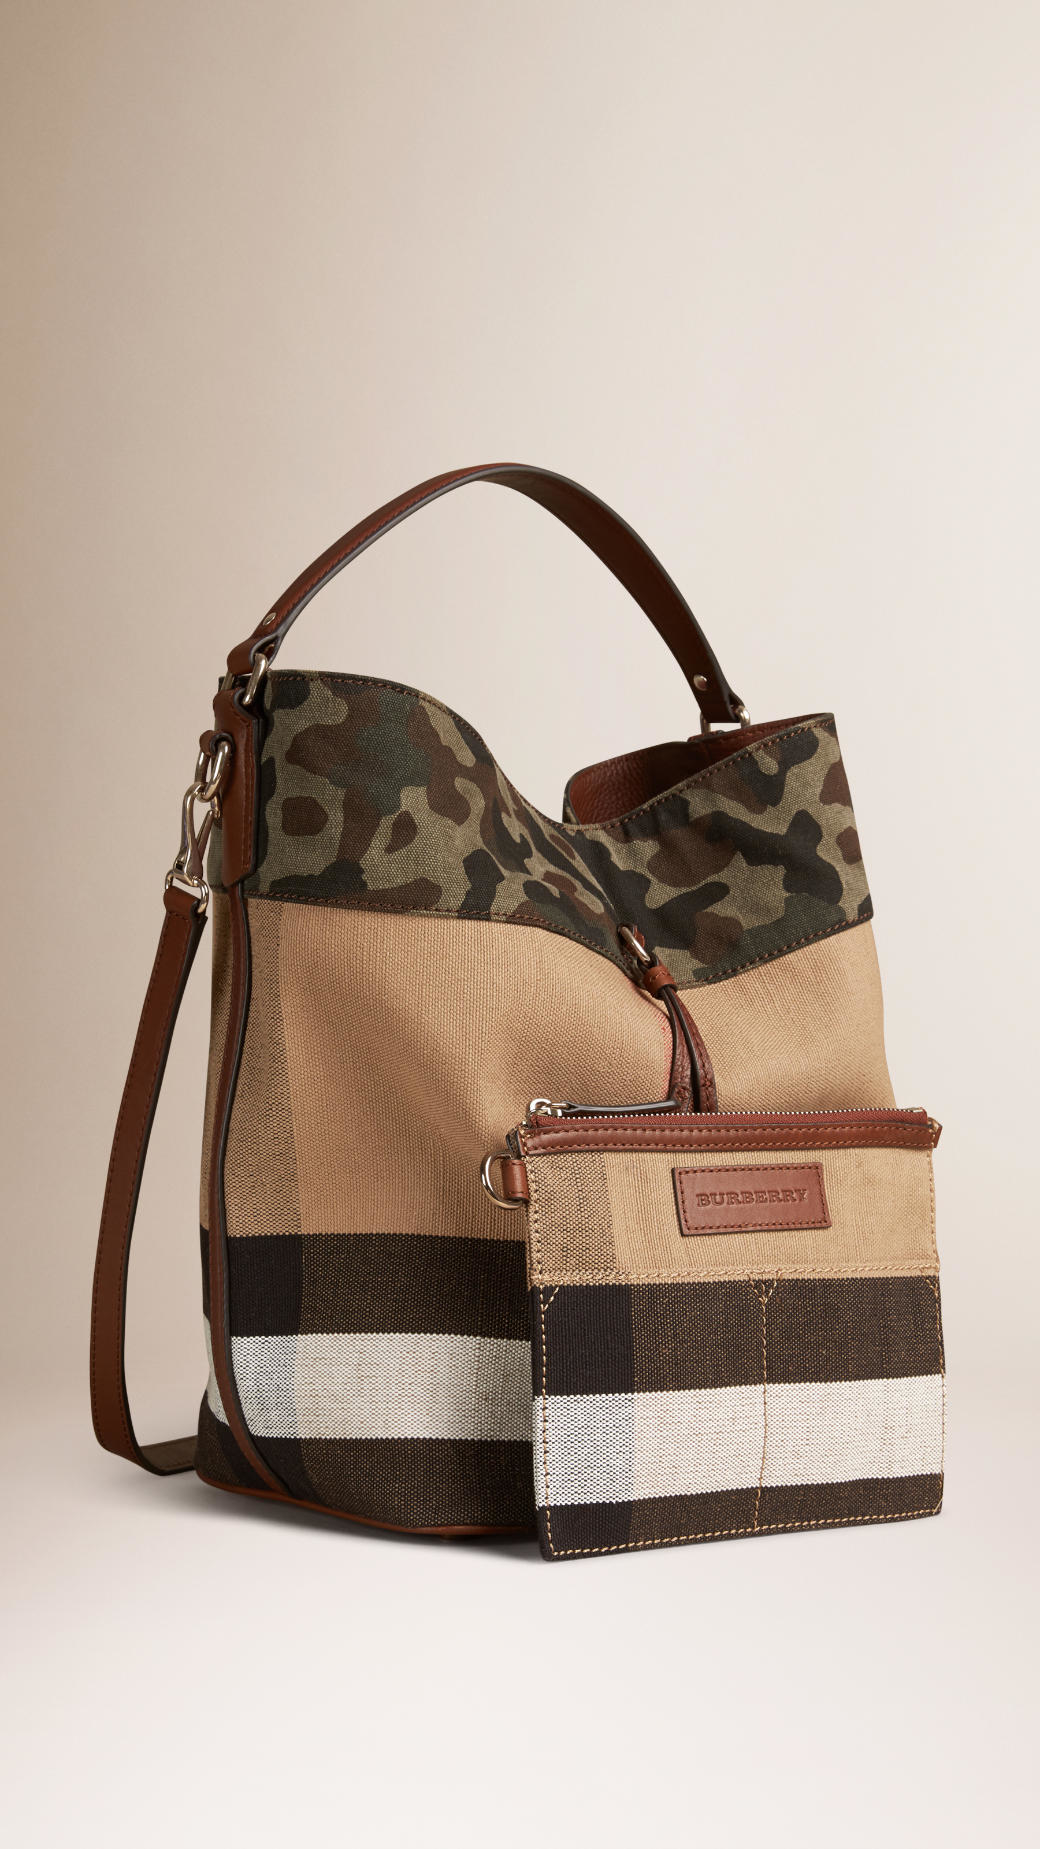 burberry camouflage bag